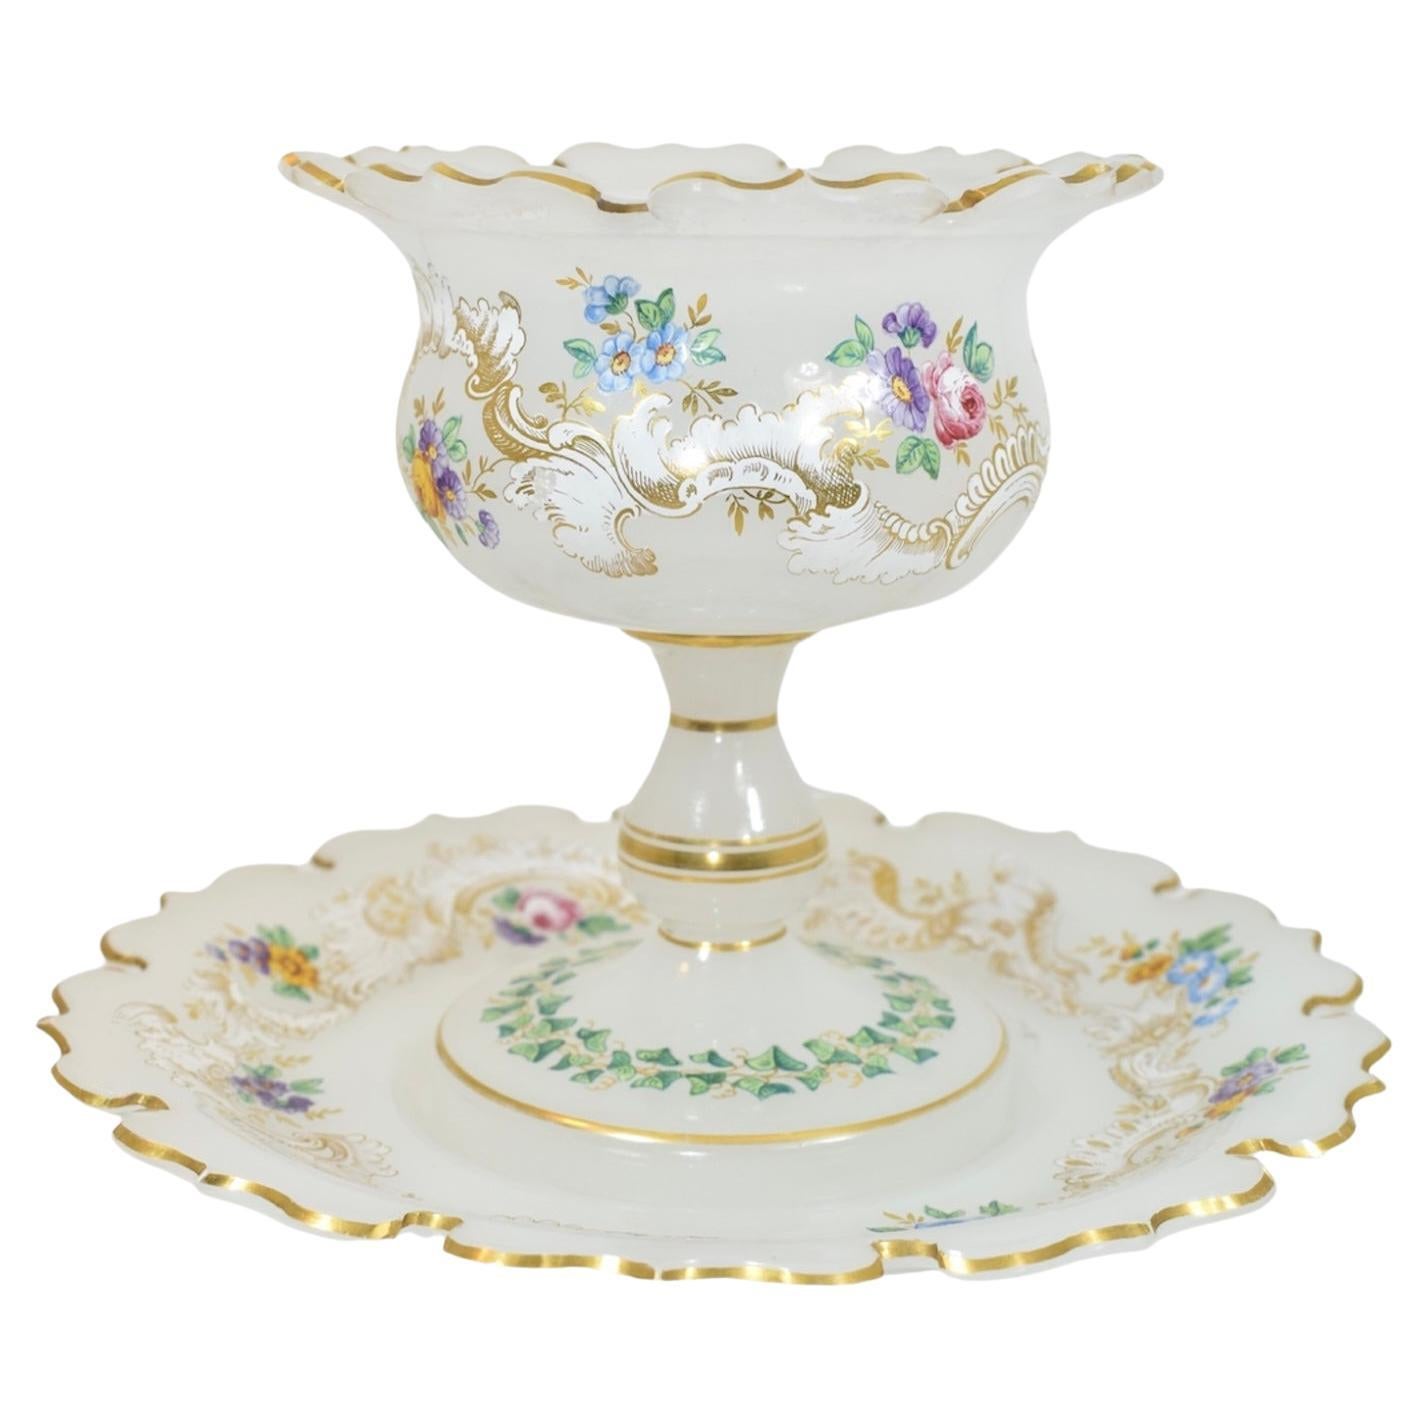 Antique Opaline Enameled Glass Tazza Bowl and Plate, 19th Century In Good Condition For Sale In Rostock, MV